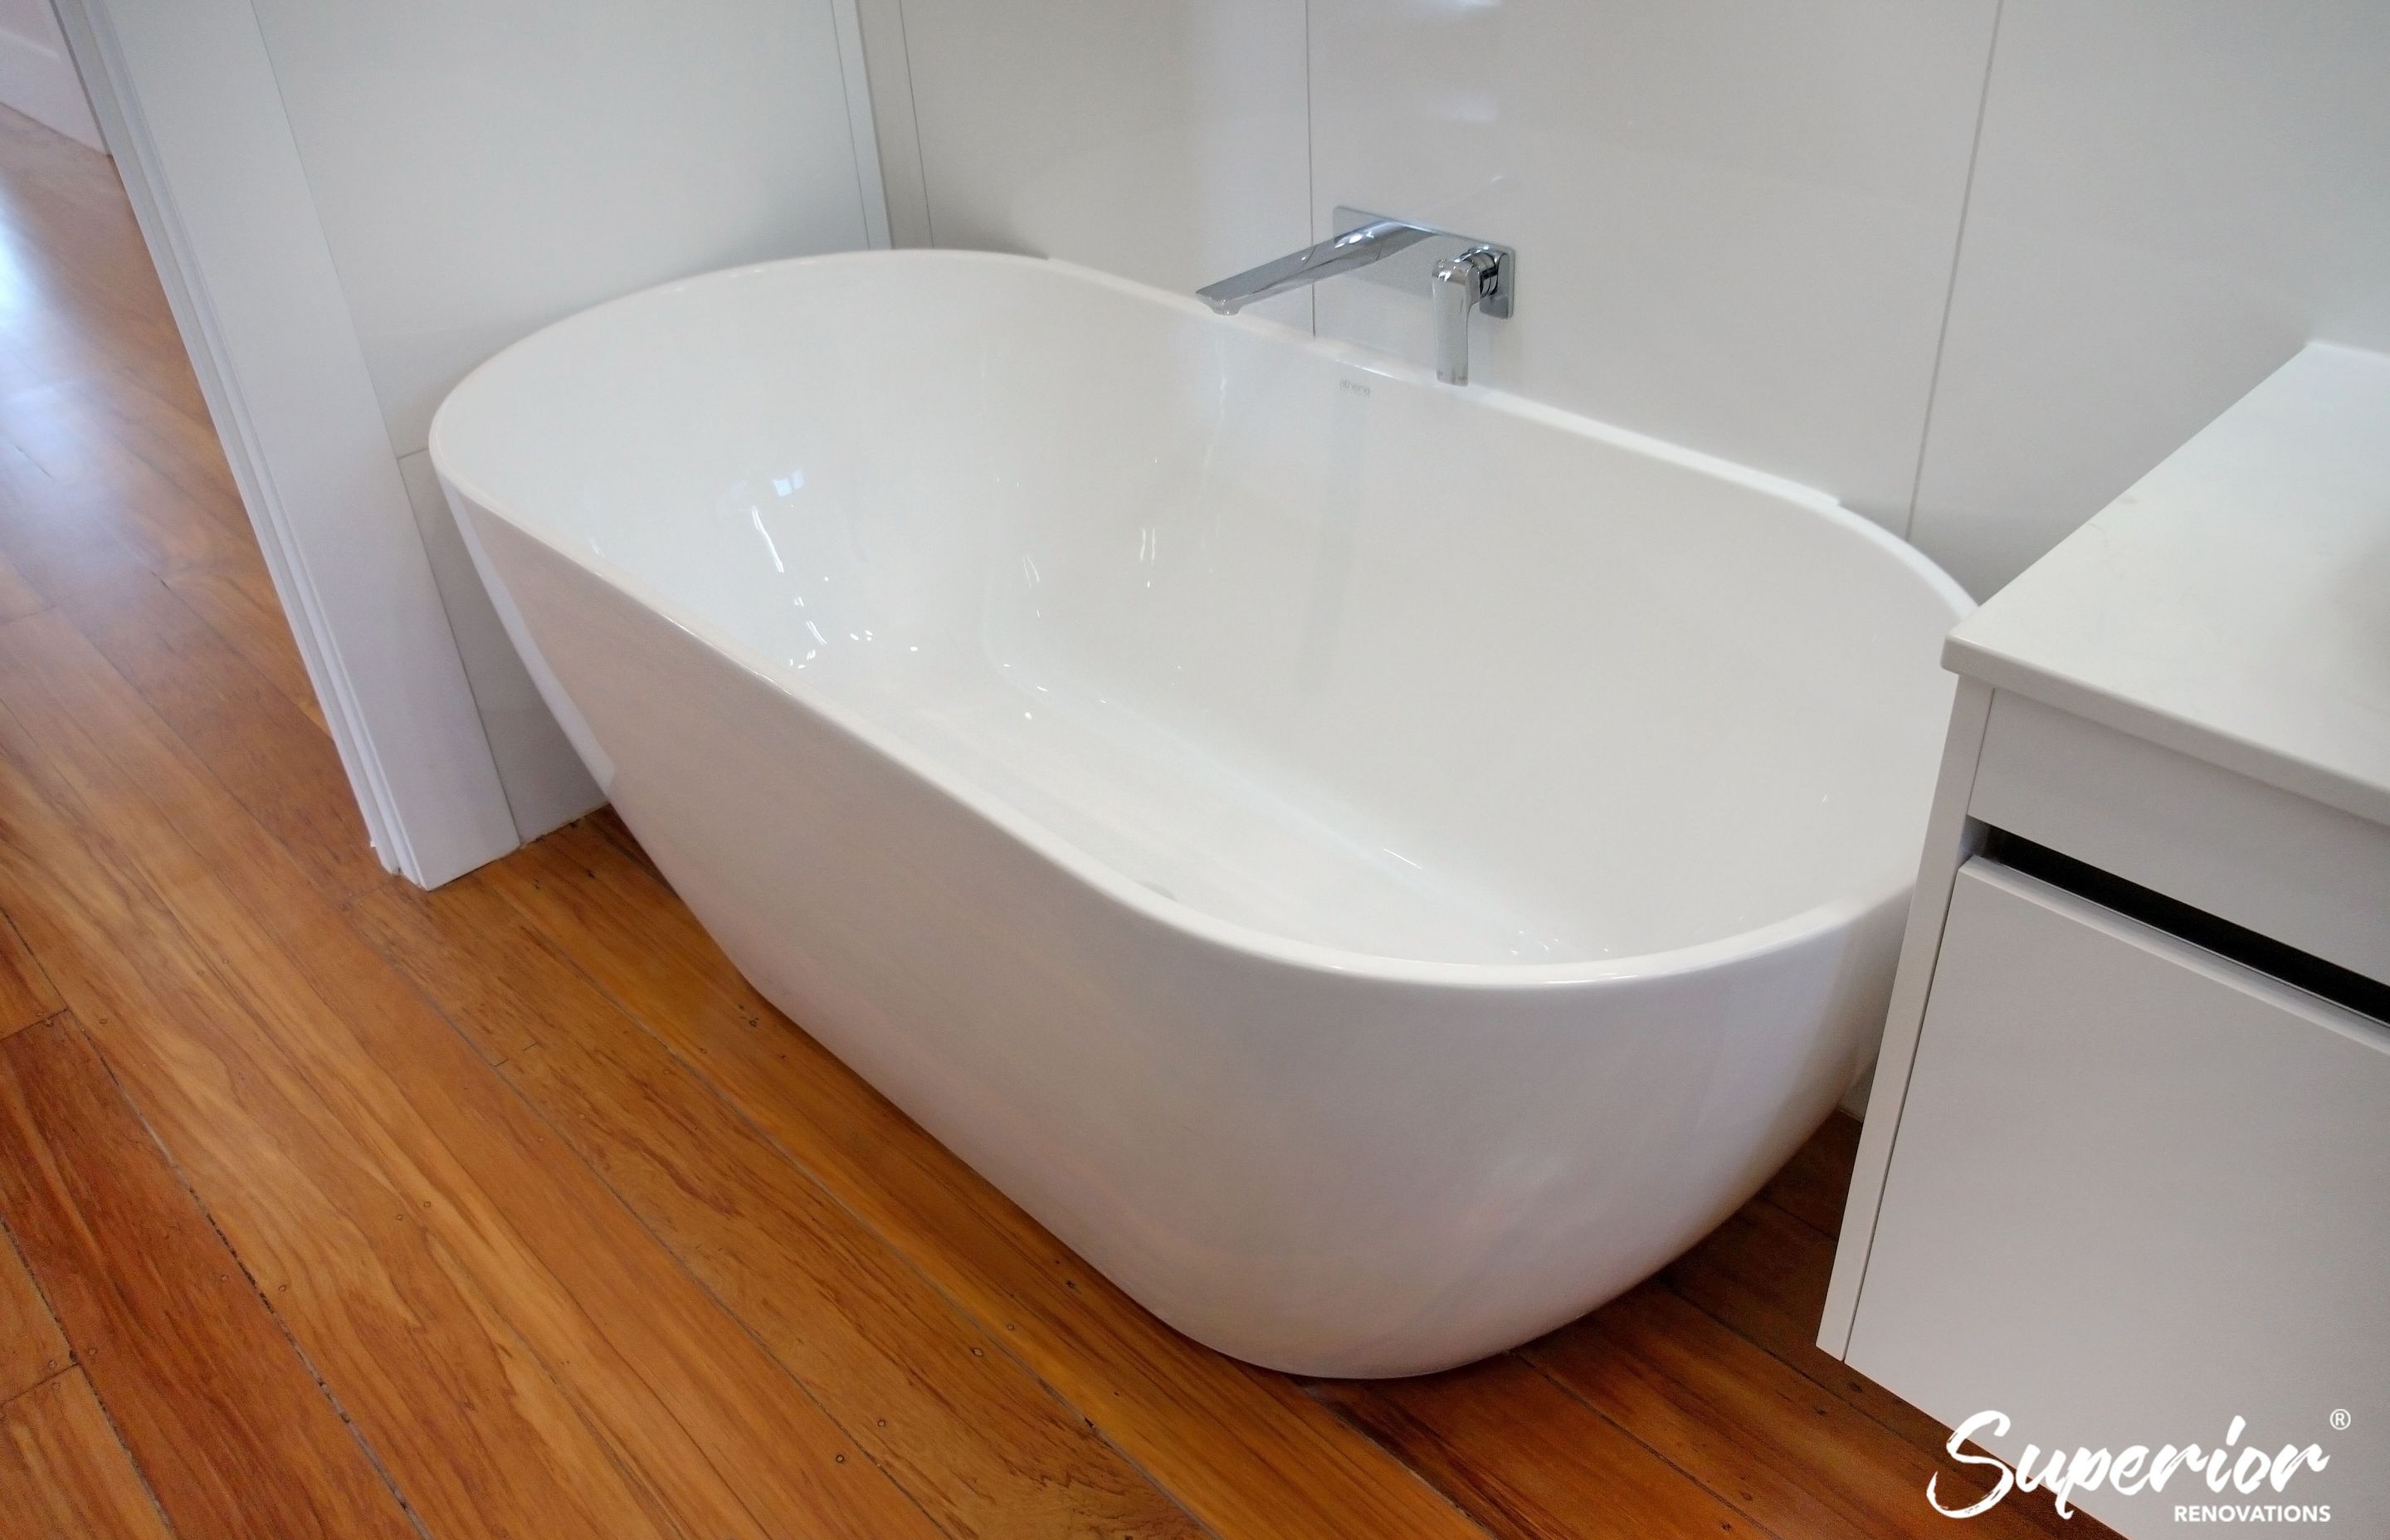 Oval shaped bath in Epsom which saves space